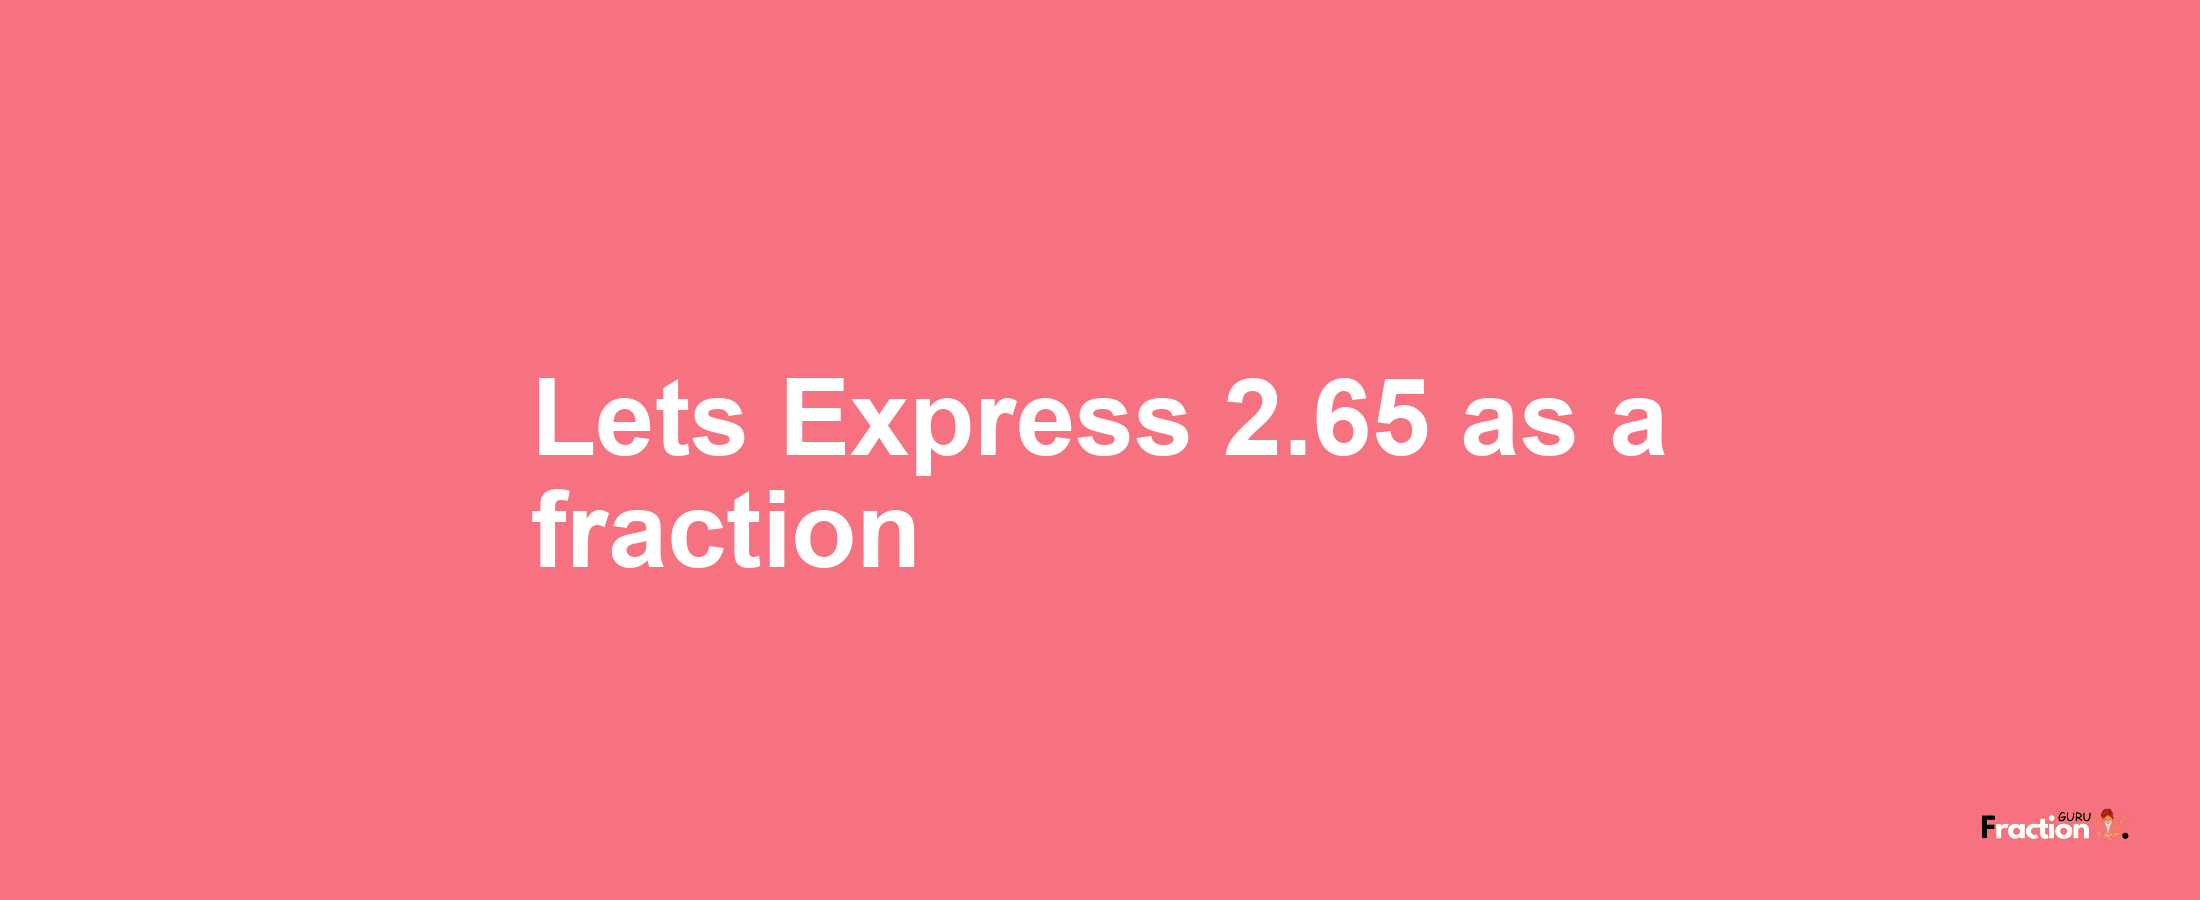 Lets Express 2.65 as afraction